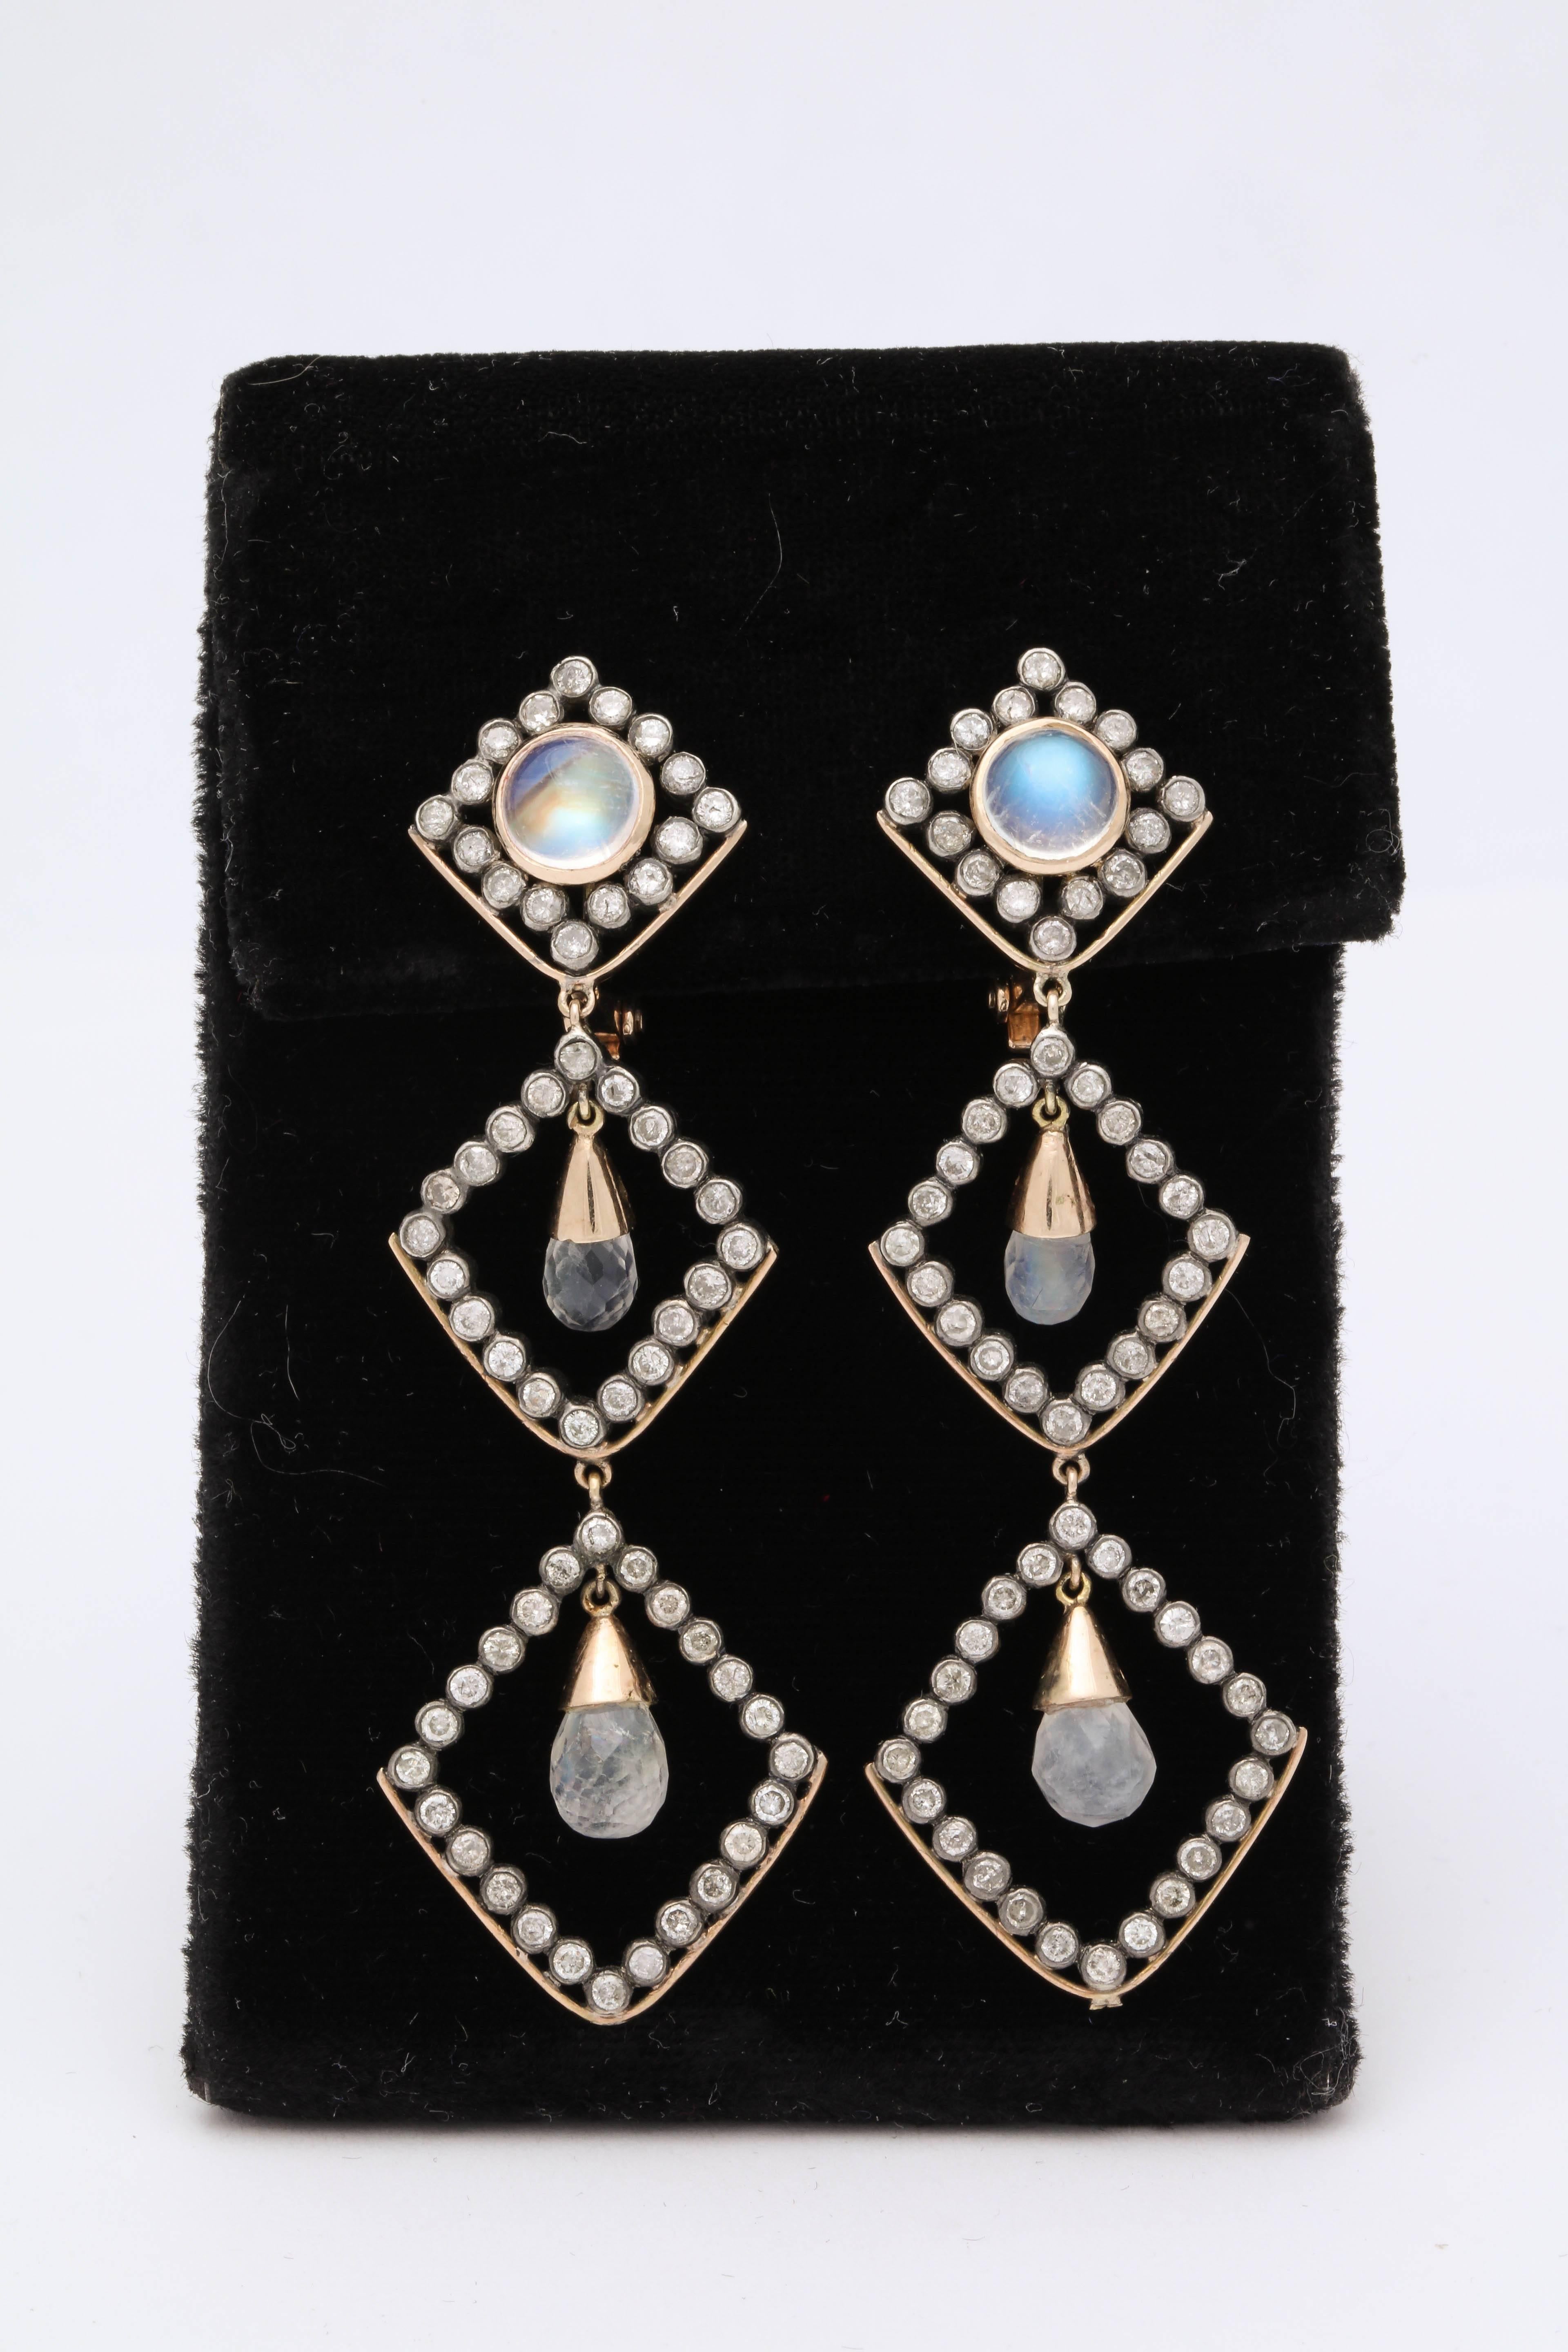 One Pair Of Triple Triangular Shaped Dangle Earrings Composed Of Six Moonstones And With Numerous Antiqe Cut Diamonds. Note All Diamonds Set In Silver With 14kt Gold Clip On Backs and 14kt Gold Posts. Made In The 1960's In America.